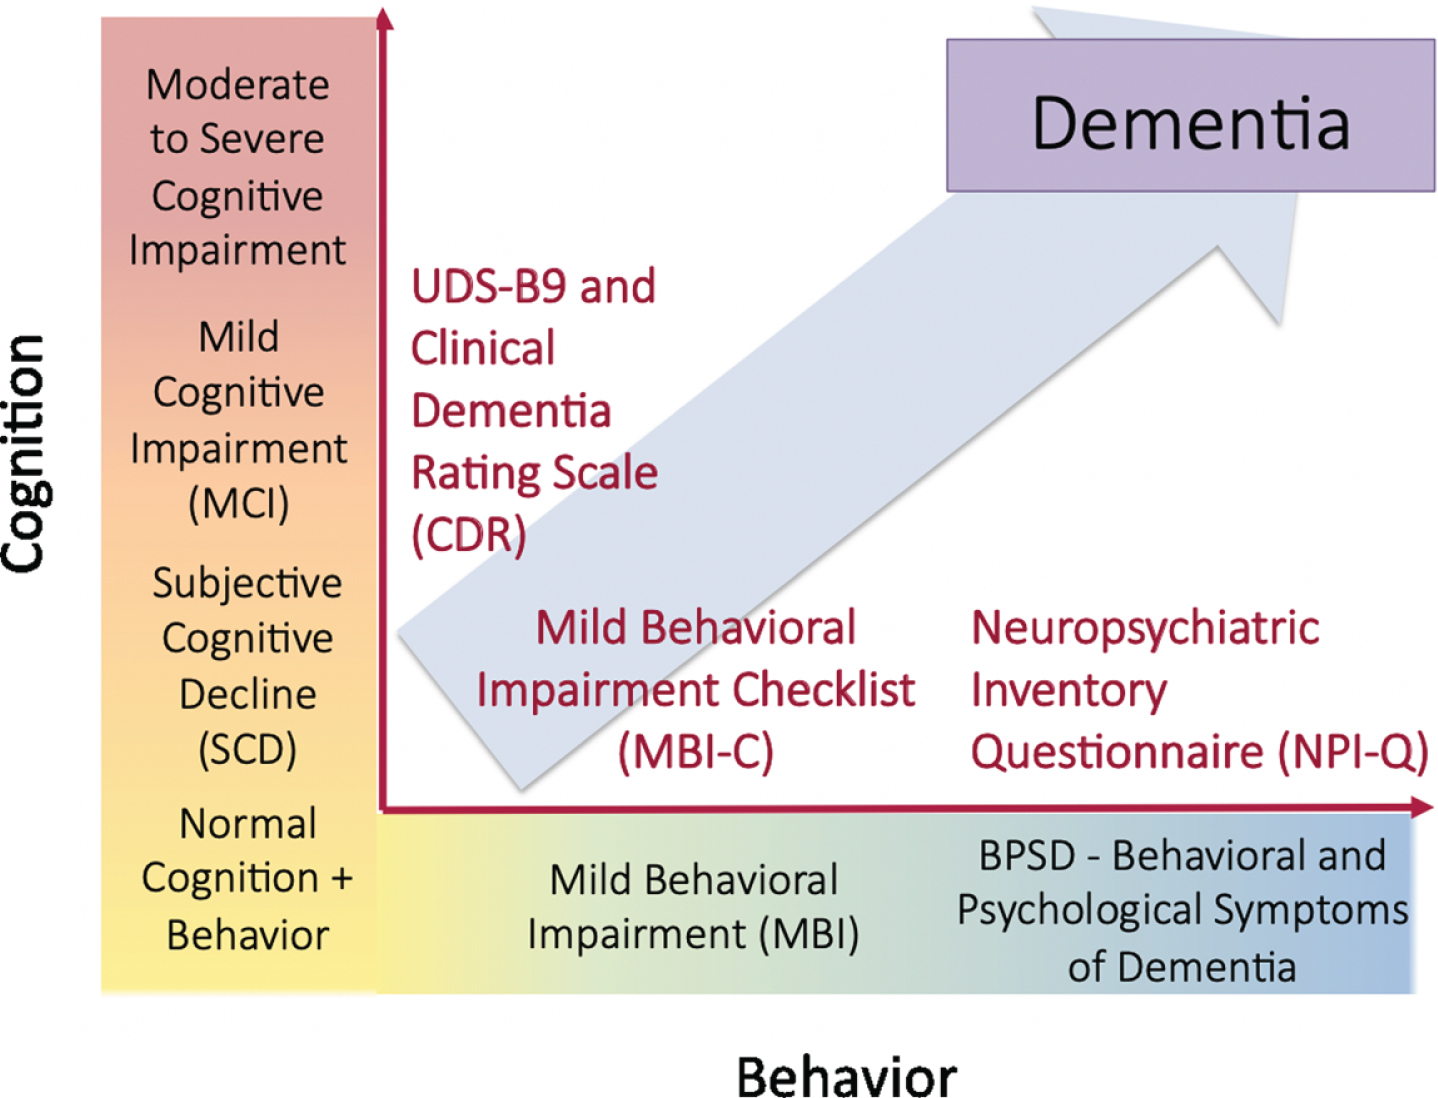 Cognitive and behavioral pre-dementia risk axes.